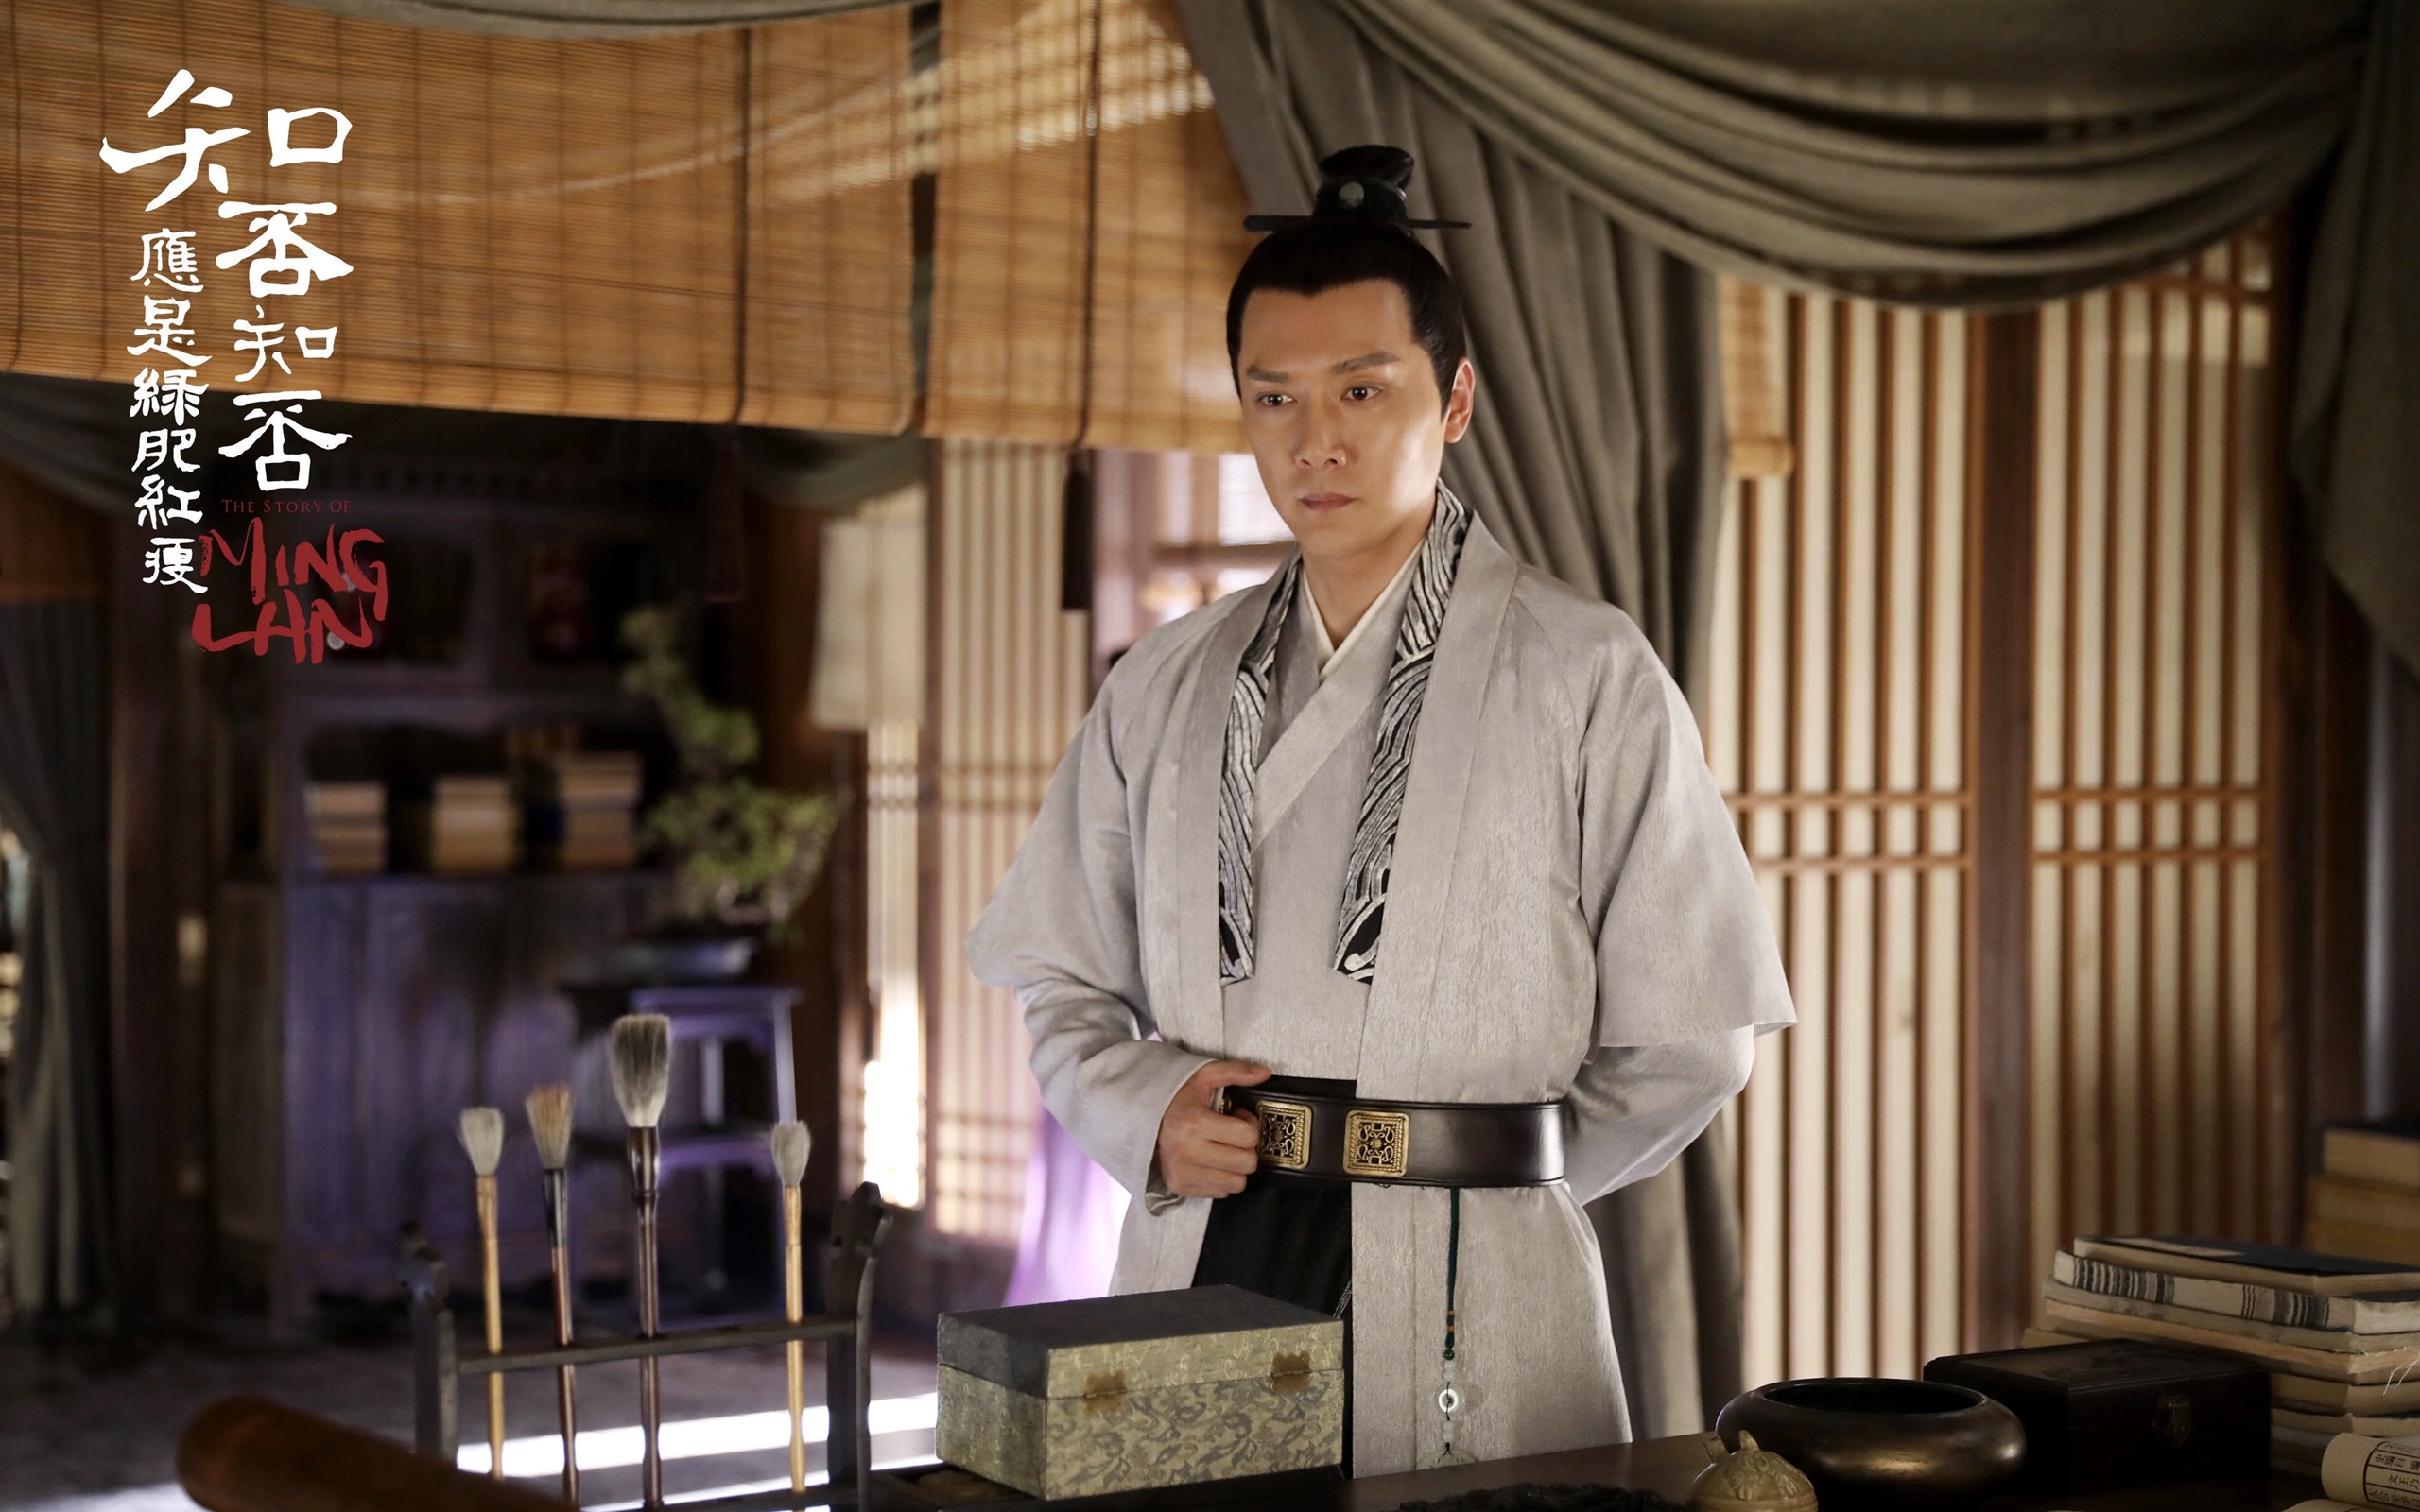 The Story Of MingLan, TV series HD wallpapers #49 - 2560x1600